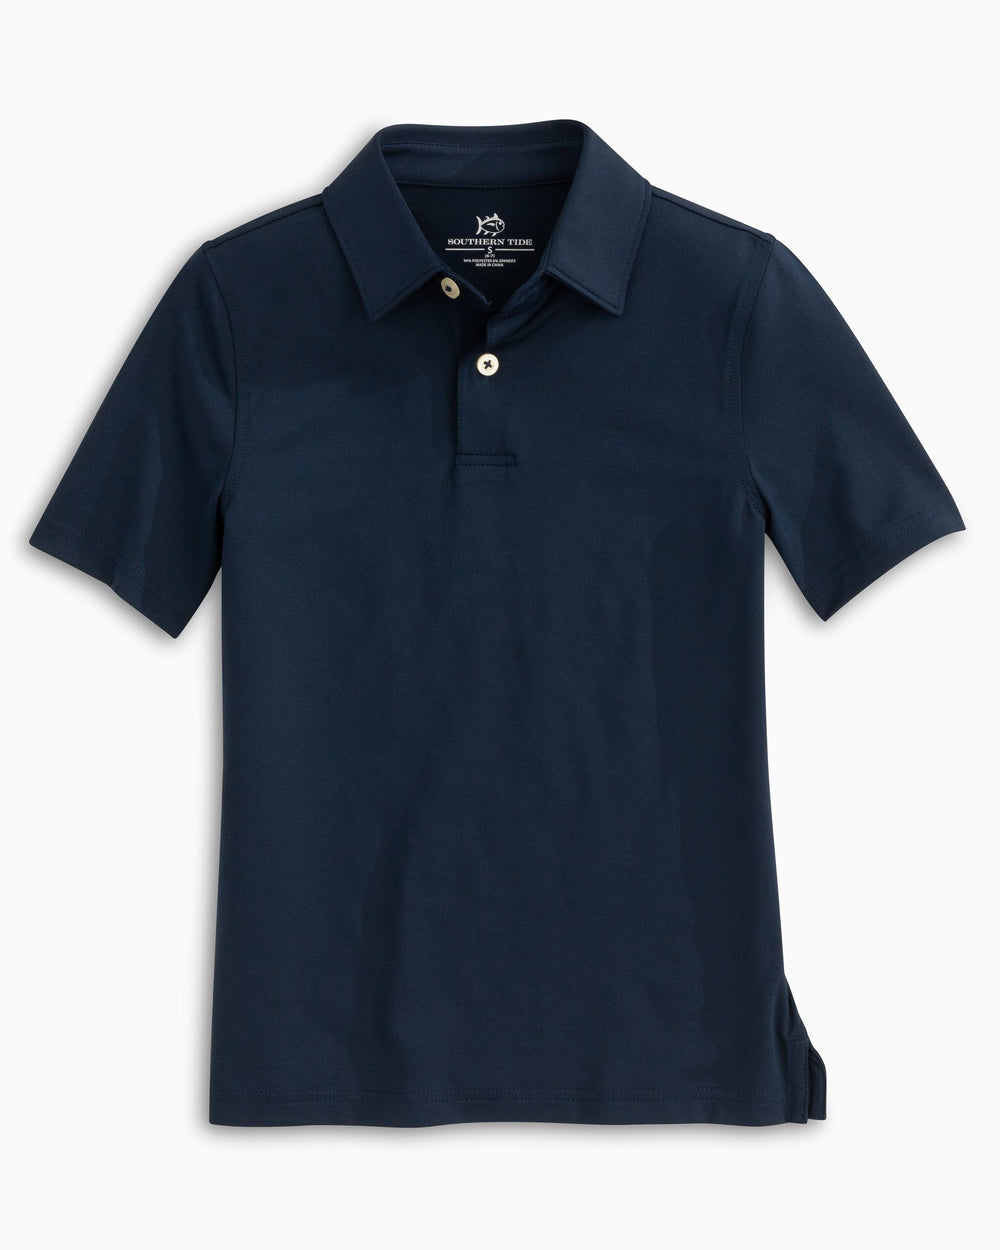 The front view of the Boys Driver Performance Polo Shirt by Southern Tide - True Navy